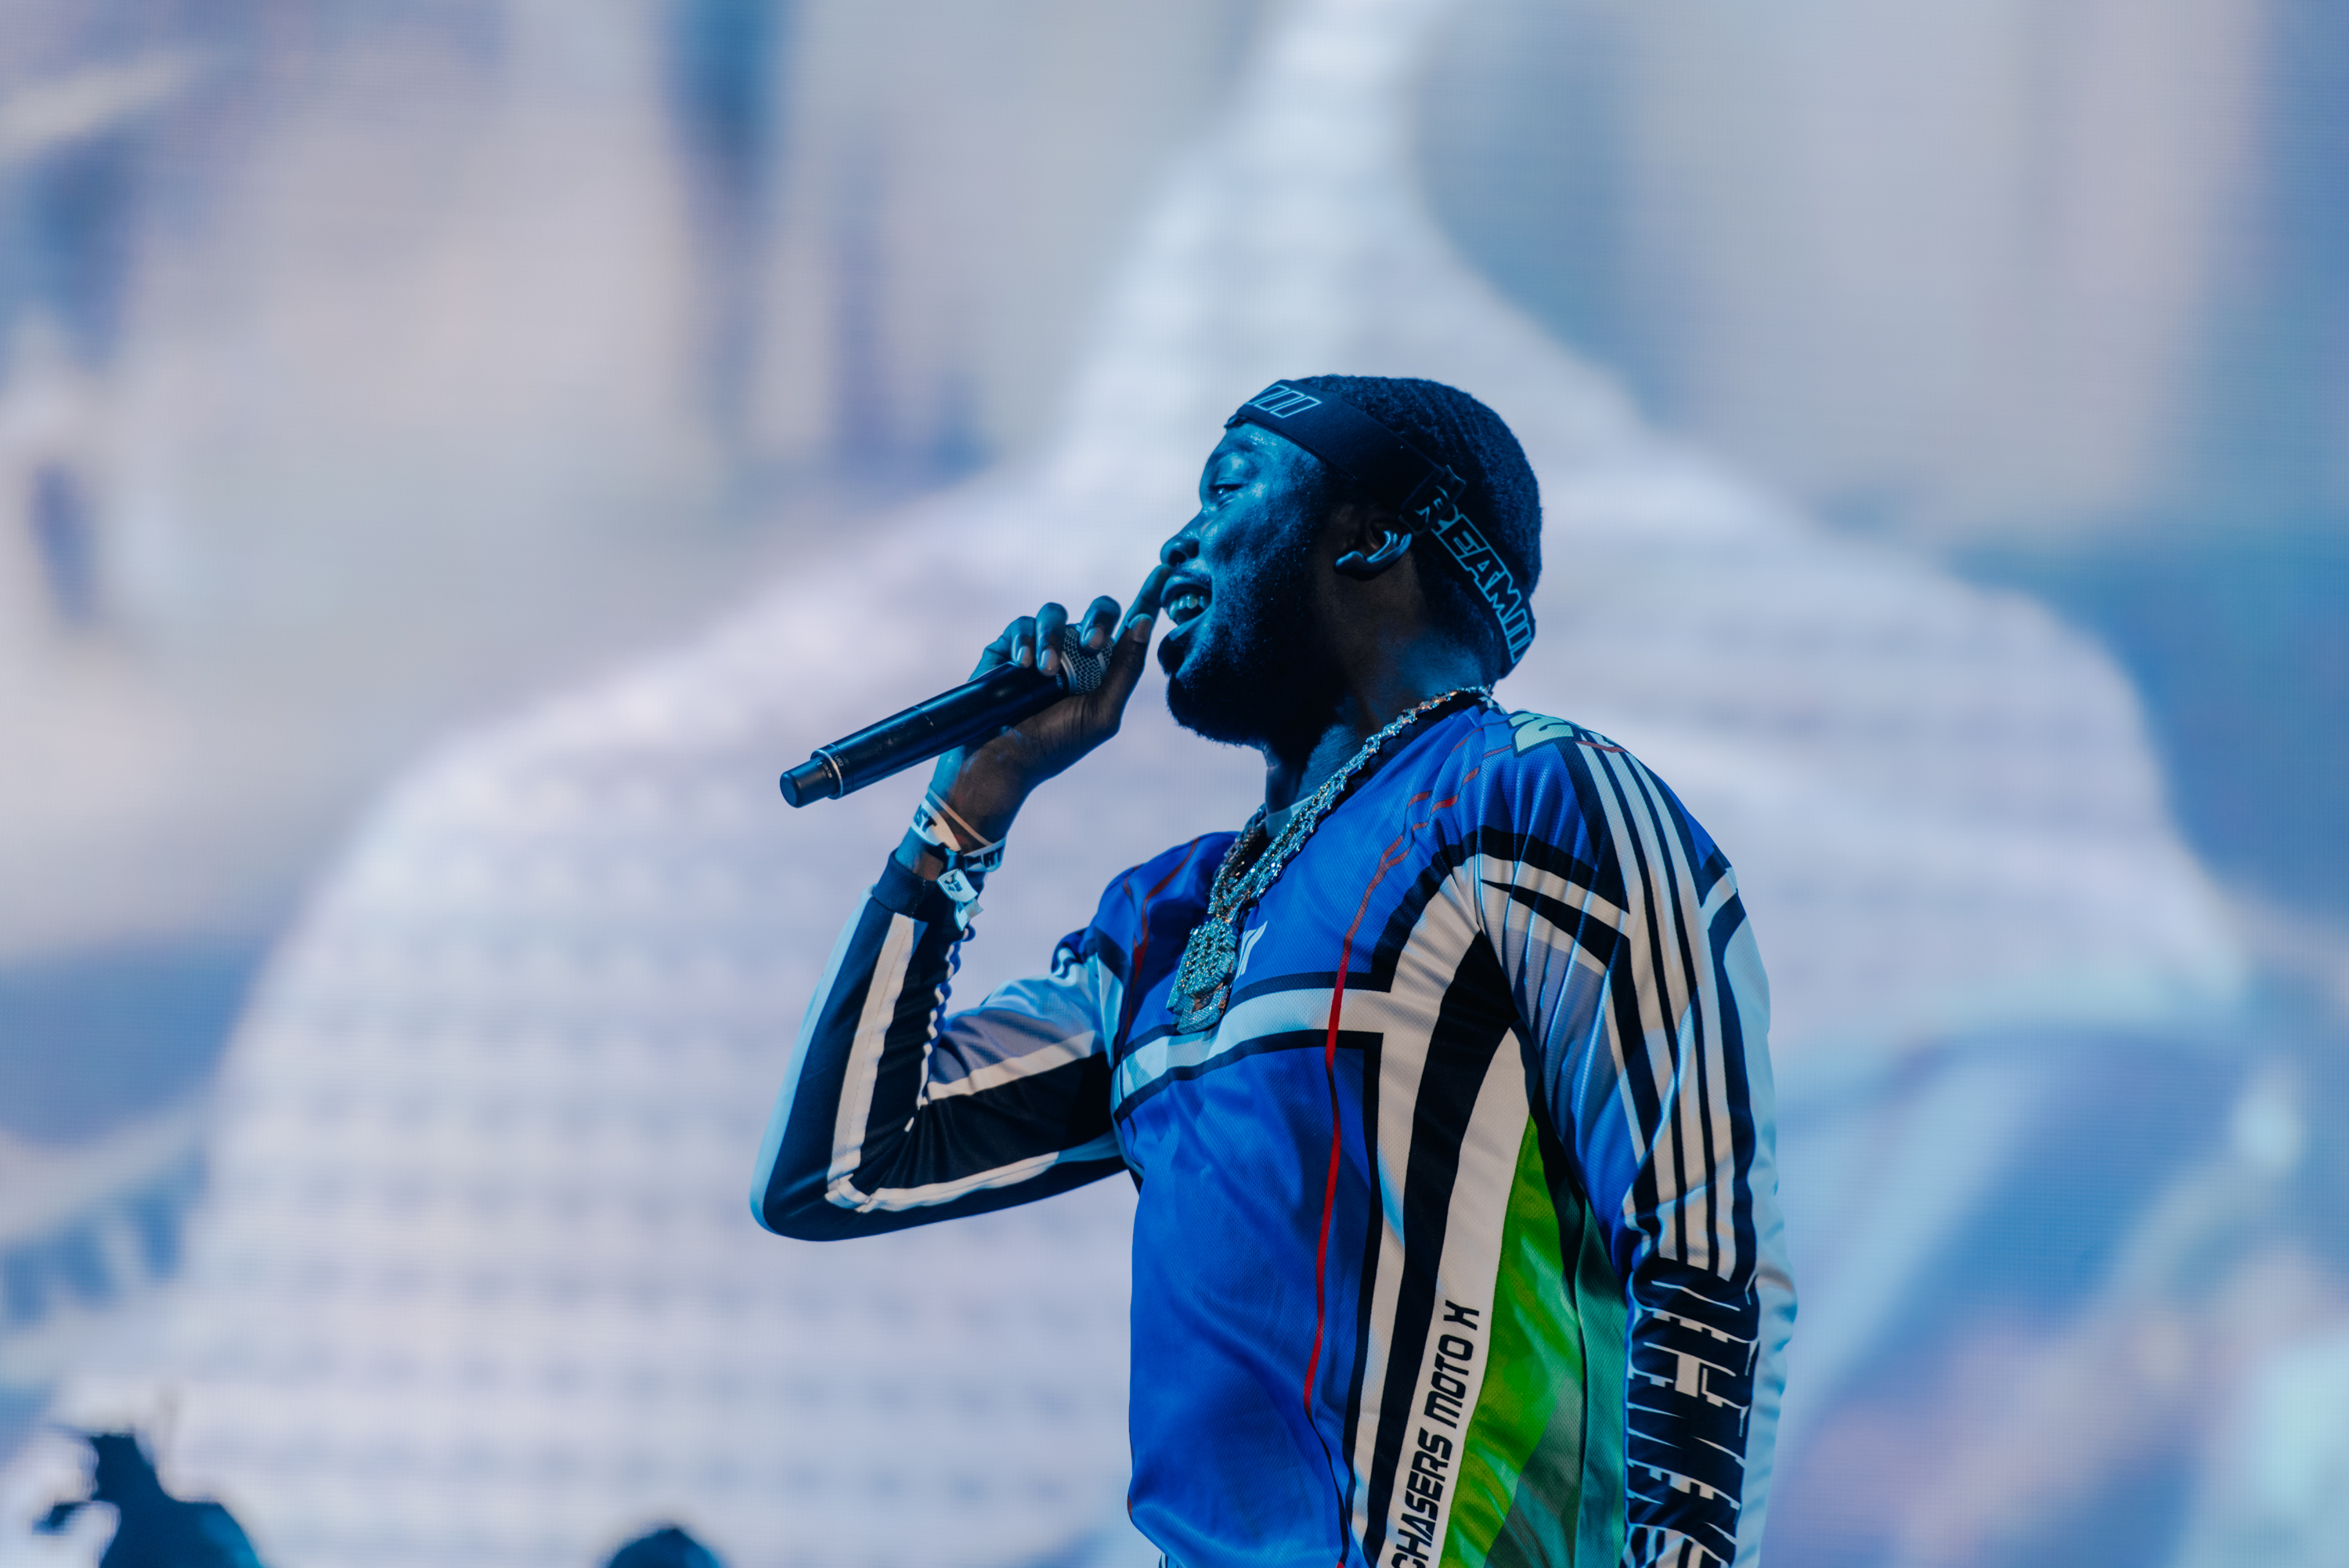 Meek Mill performs at Rolling Loud Miami 2018.